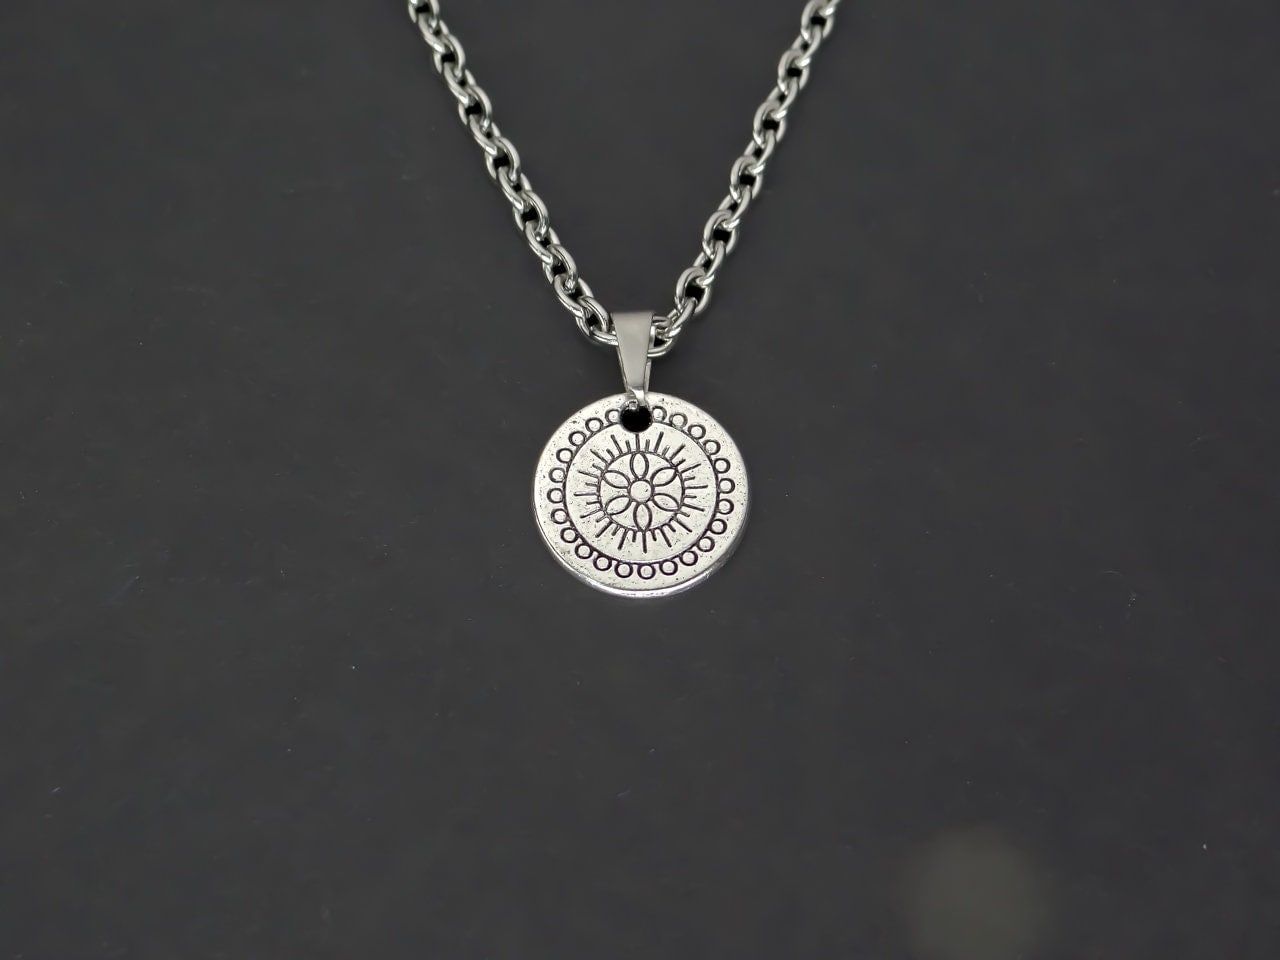 CRW Bohemian Flower Necklace with 1.6mm rolo chain in silver - Coin Necklaces for Women - Pattern Necklace for Men - Necklace with Pendant